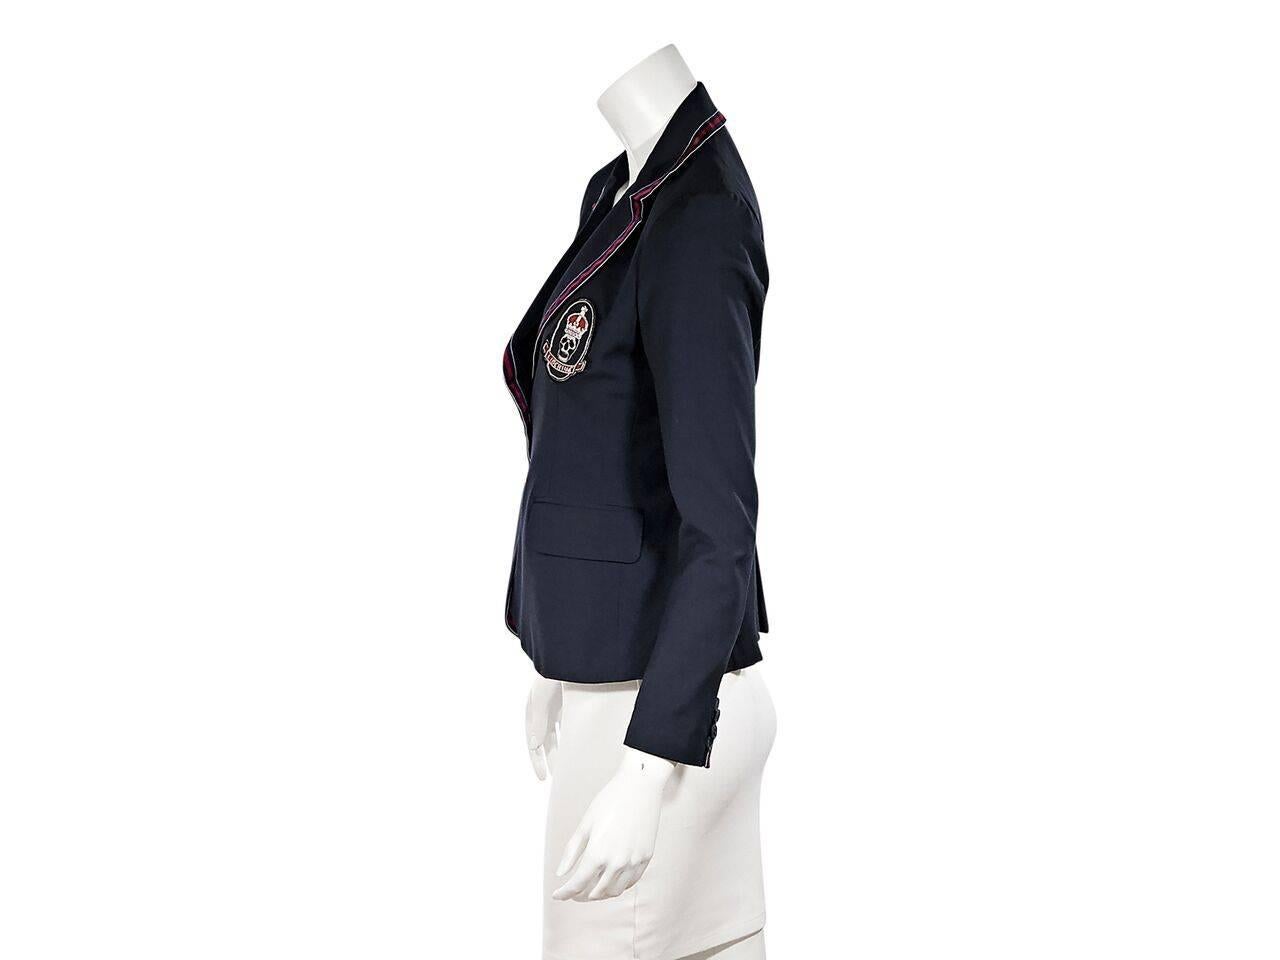 Product details:  Navy blue schoolboy blazer by Libertine.  Red grosgrain trim.  Notched lapel.  Long sleeves.  Four-button detail at cuffs.  Button-front closure.  Patch detail at chest.  Waist flap pockets.  Center back inverted hem.
Condition: